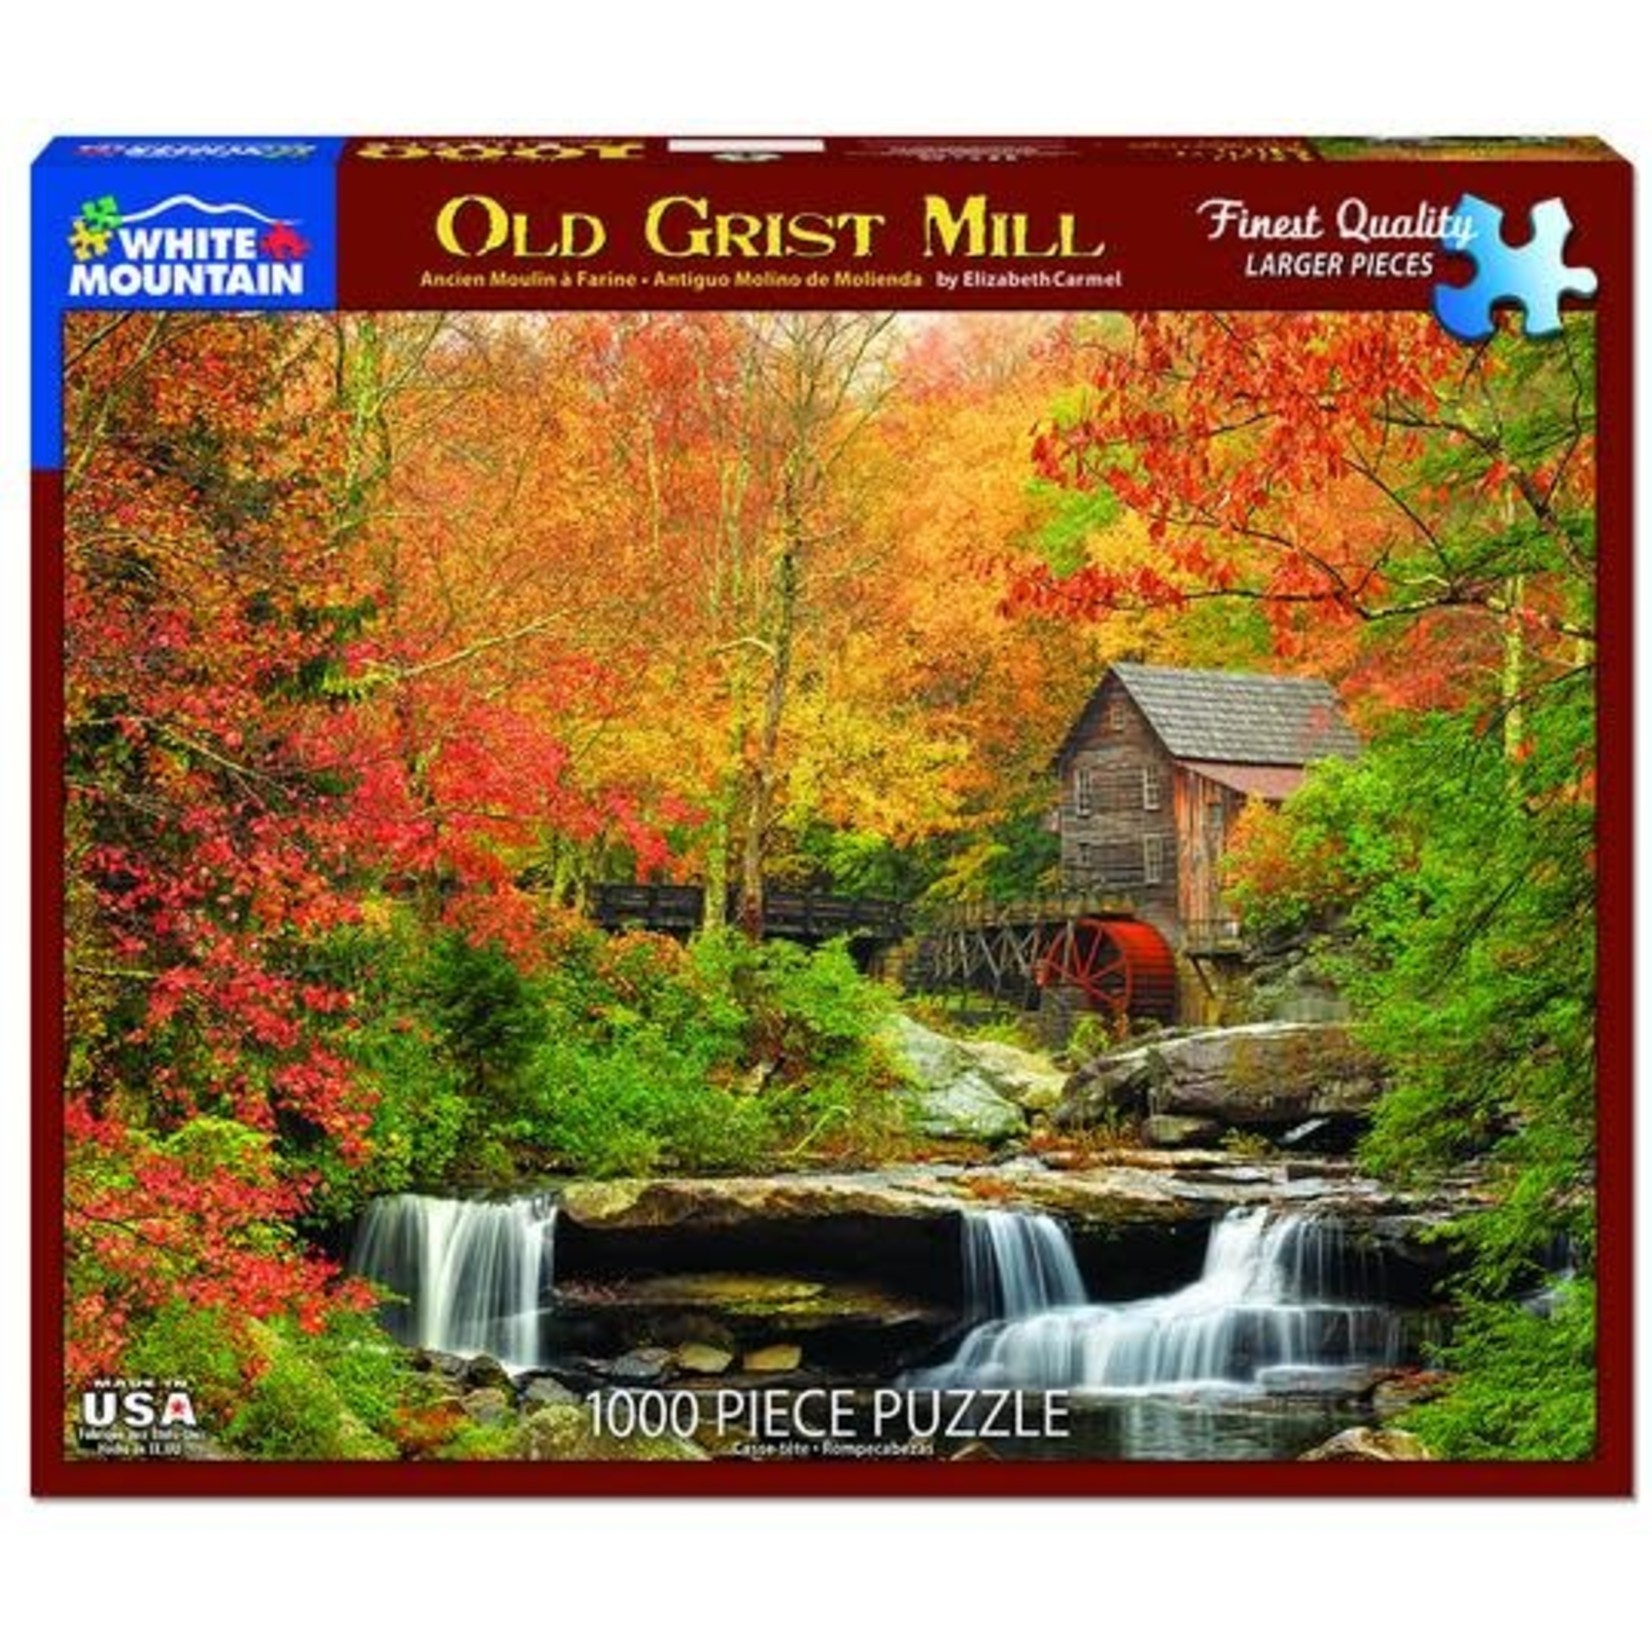 OLD GRIST MILL PUZZLE